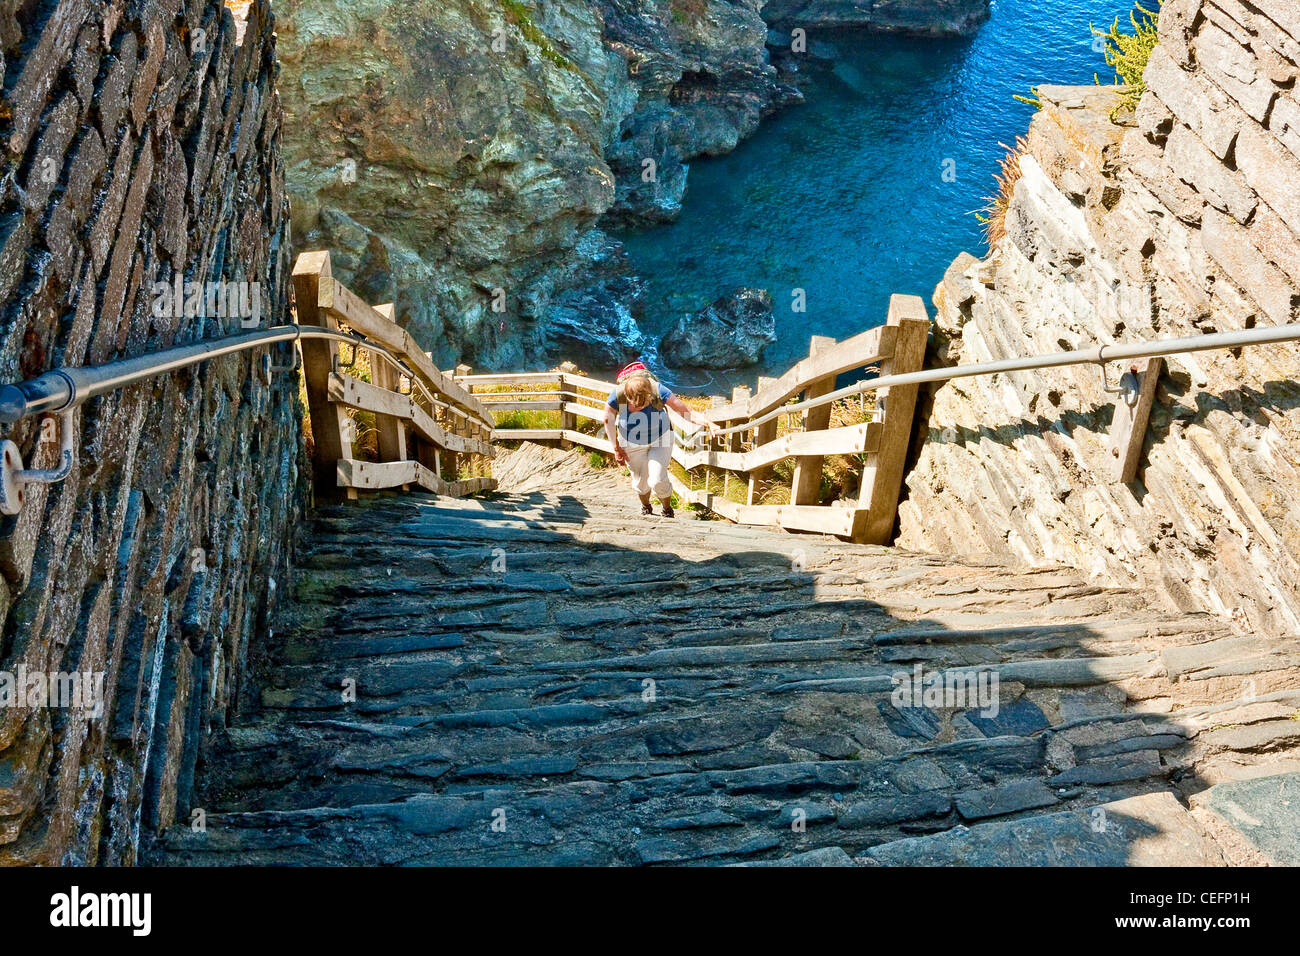 Steep steps leading to/from beach at Newquay, Cornwal .For climbing career  ladder, corporate ladder. Also housing ladder / property ladder, long climb  Stock Photo - Alamy